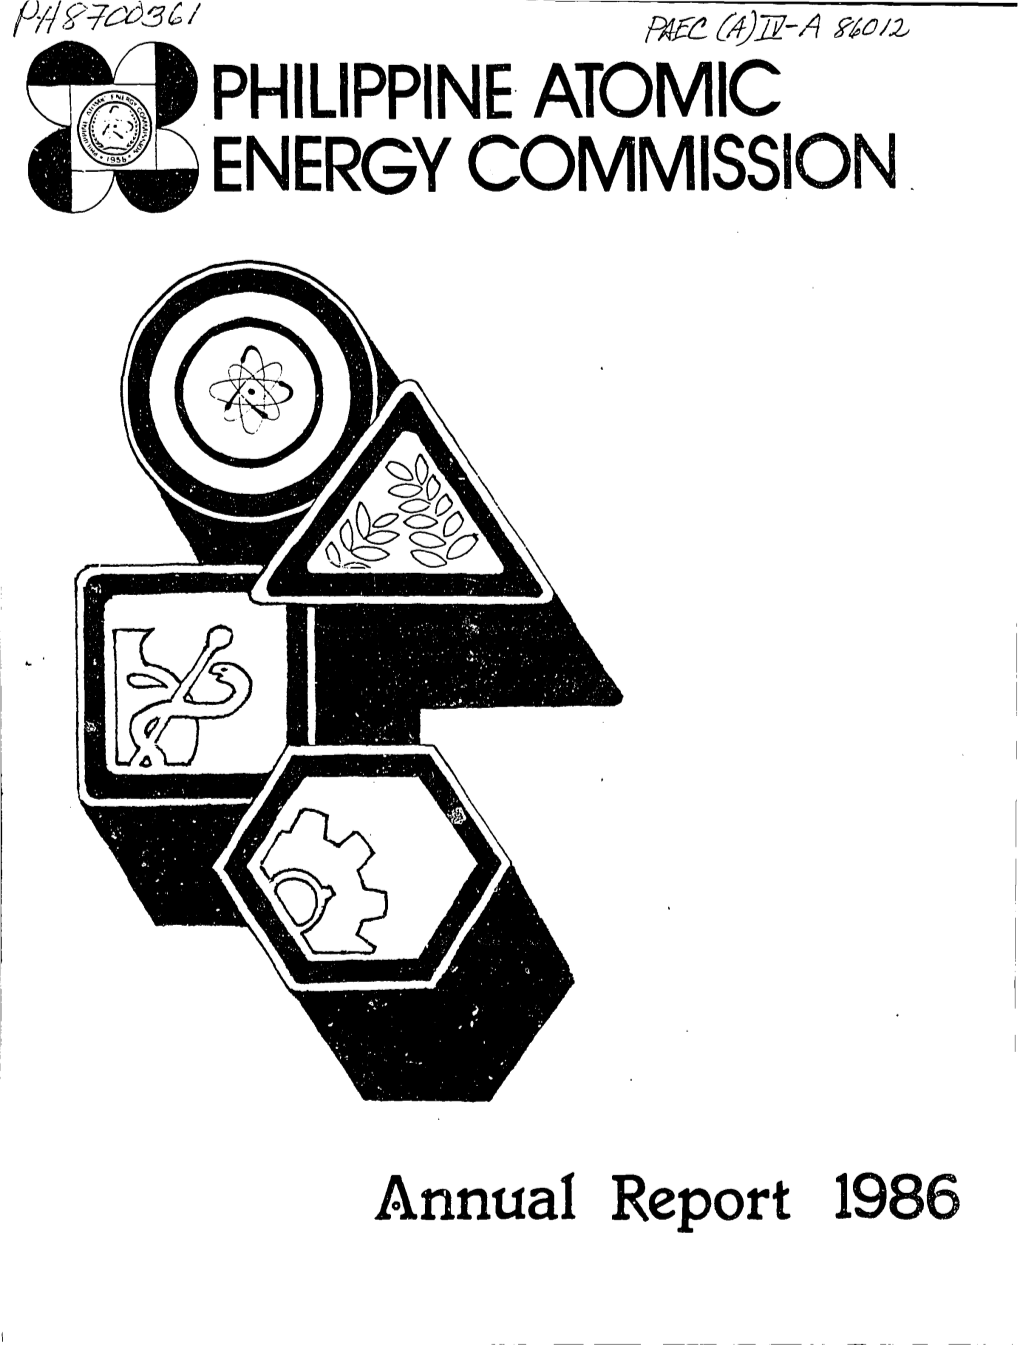 PHILIPPINE ATOMIC ENERGY COMMISSION Annual Report 1986